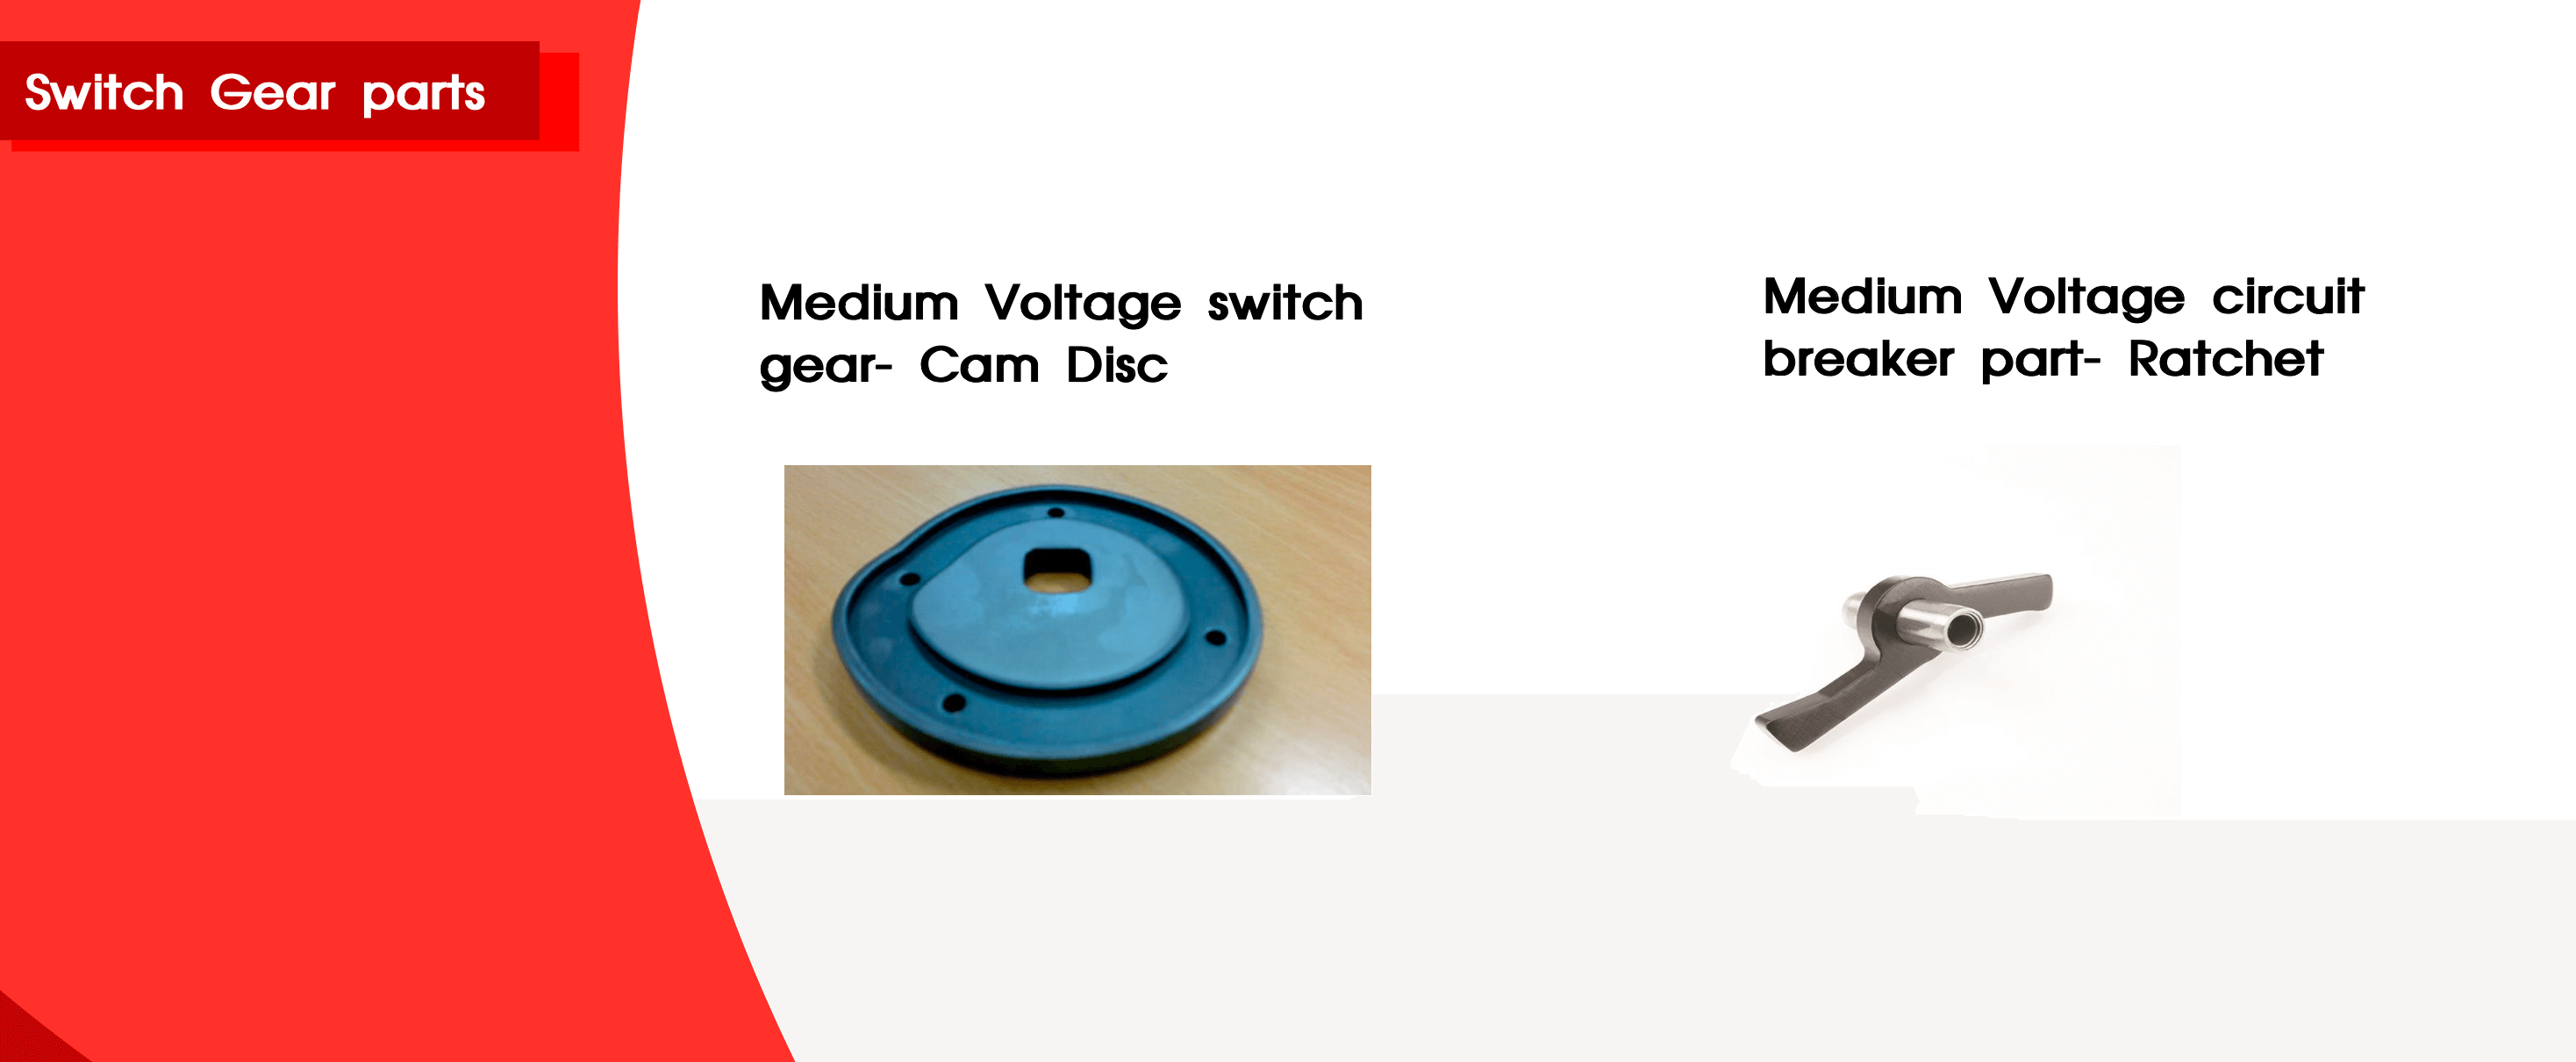 Switch gear parts